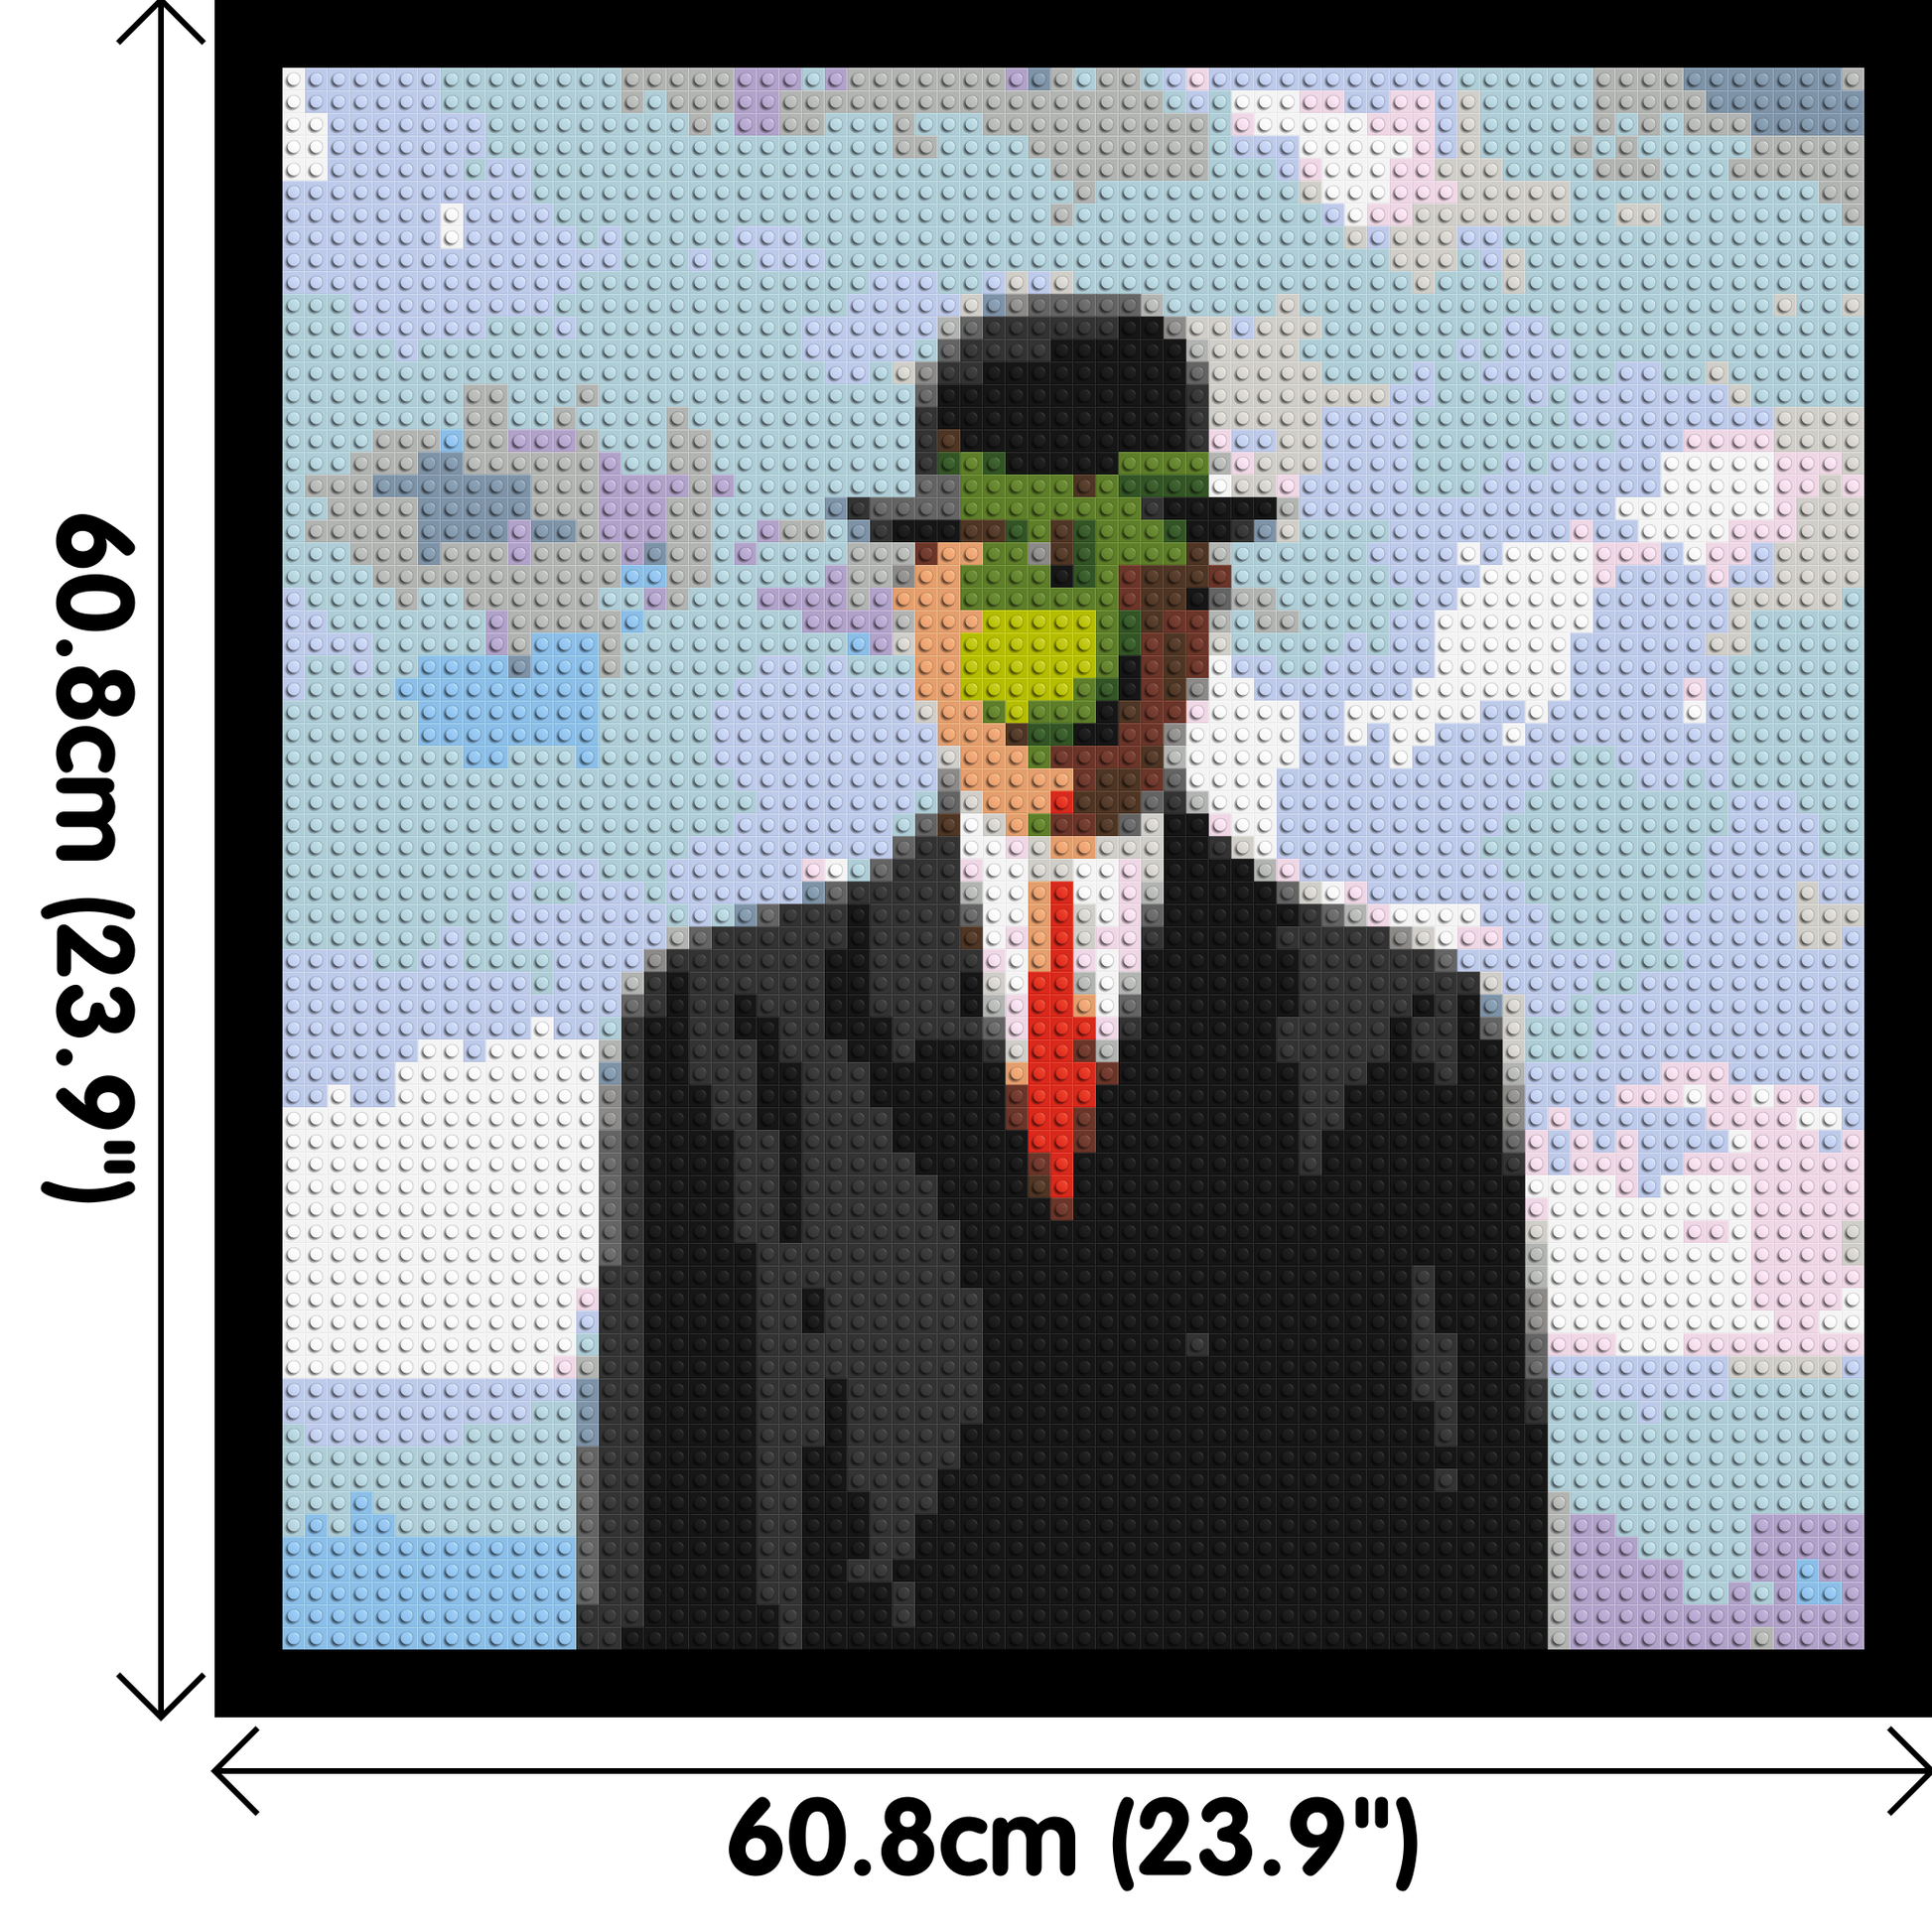 The Son of Man by René Magritte - Brick Art Mosaic Kit 3x3 dimensions with frame